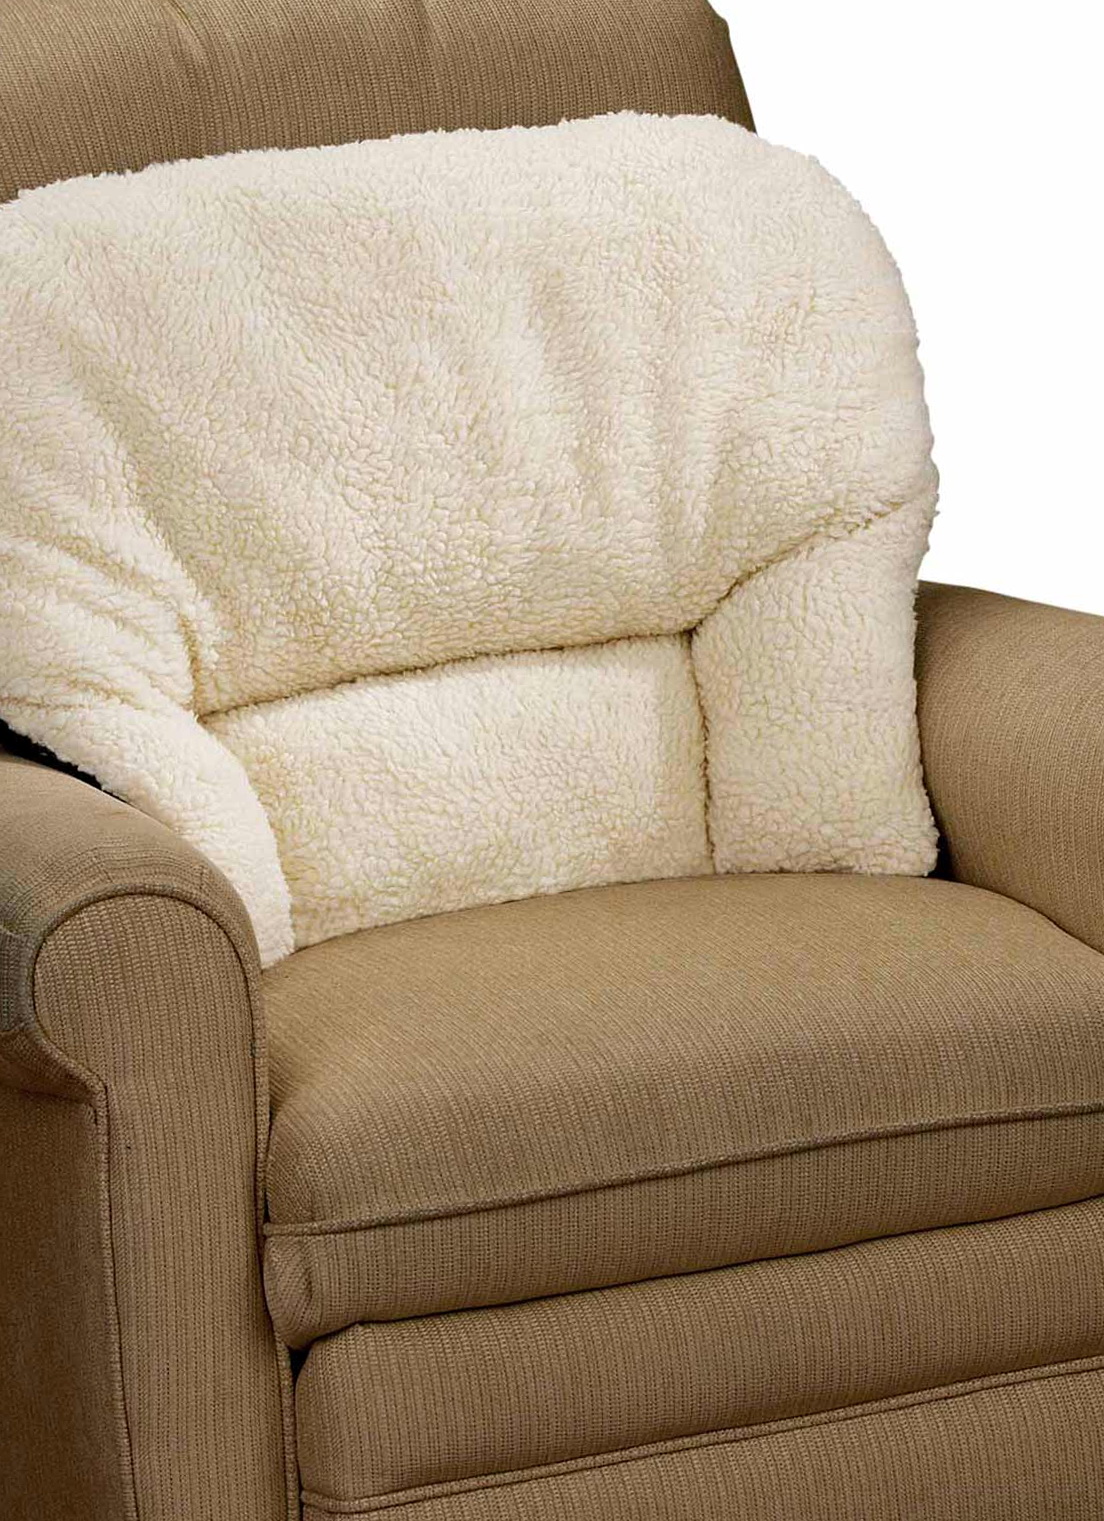 Back Support Cushion For Recliner Home Design Ideas